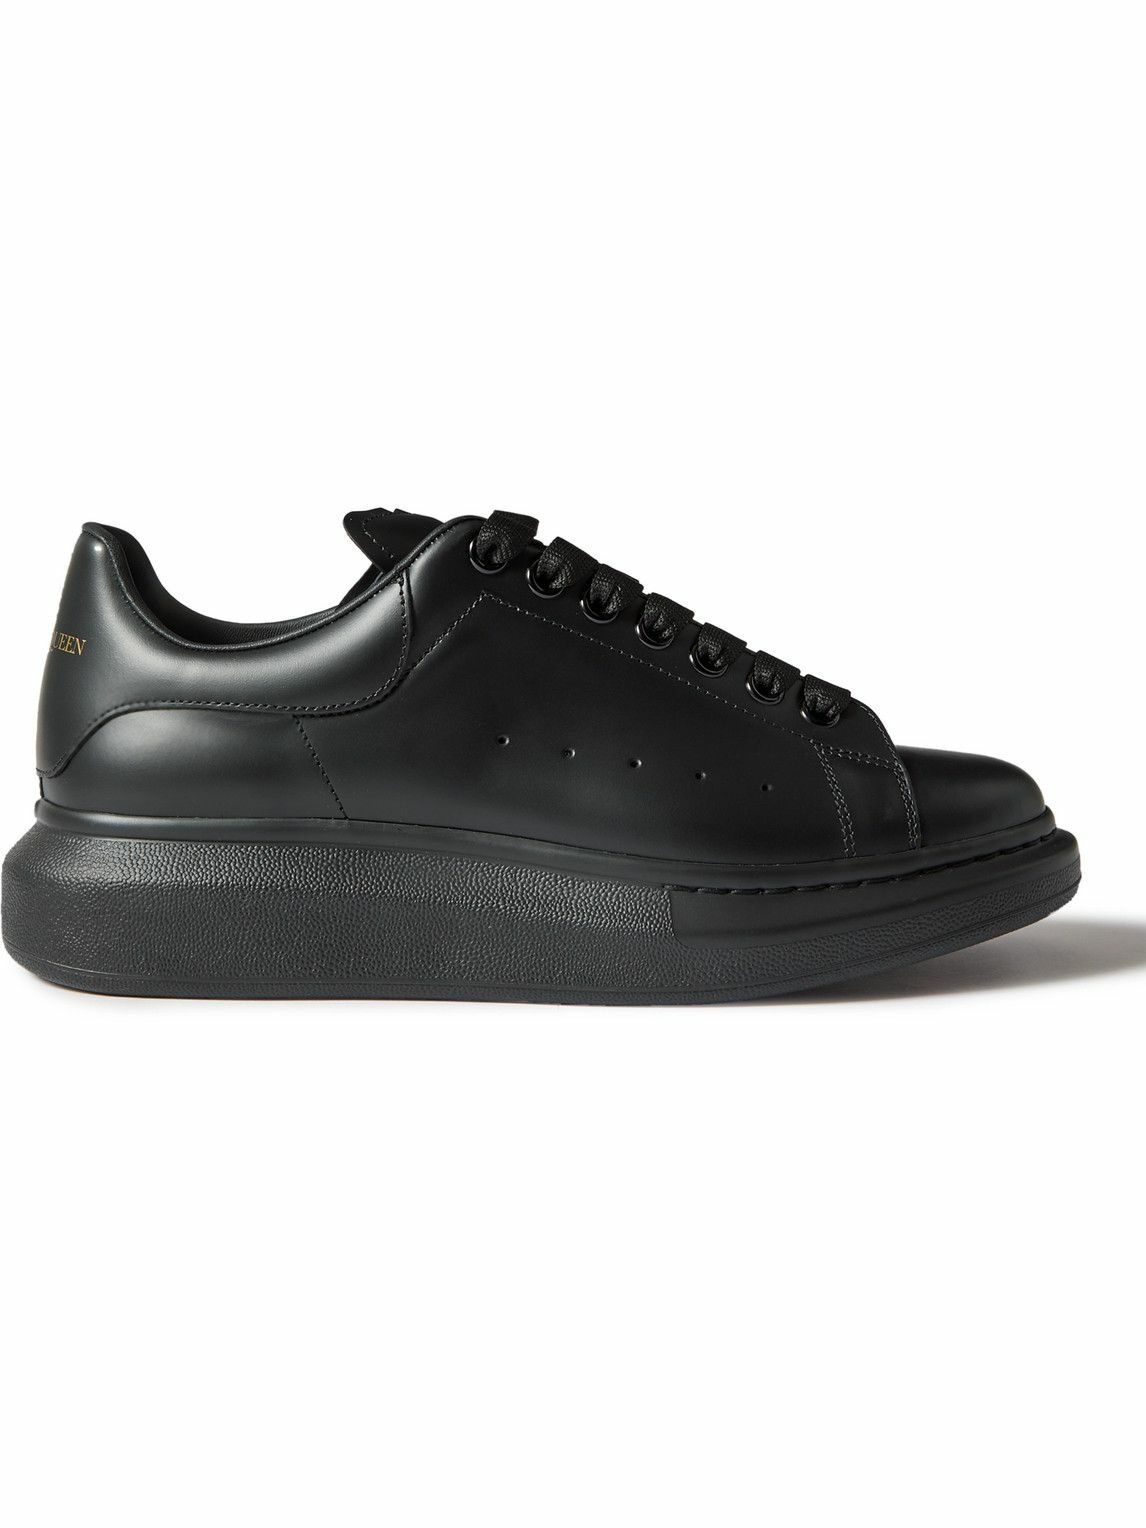 Photo: Alexander McQueen - Exaggerated-Sole Studded Leather Sneakers - Black